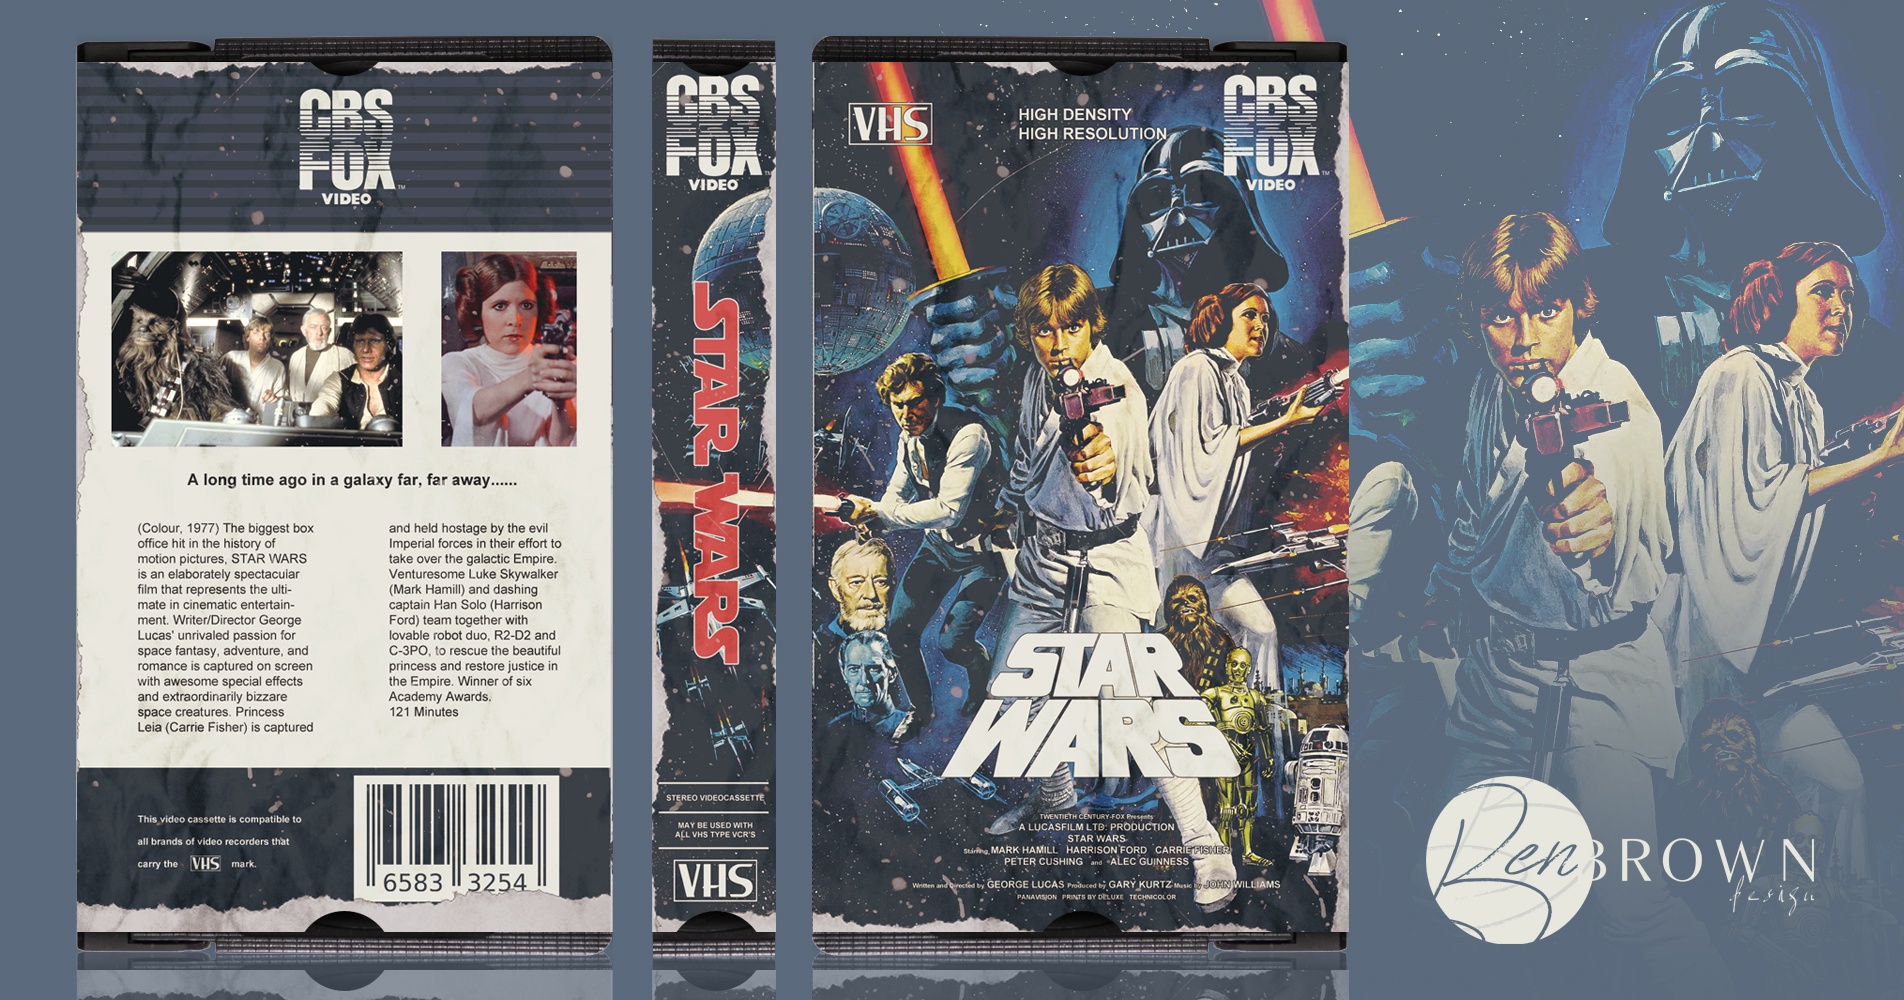 Star Wars Episode IV: A New Hope box cover